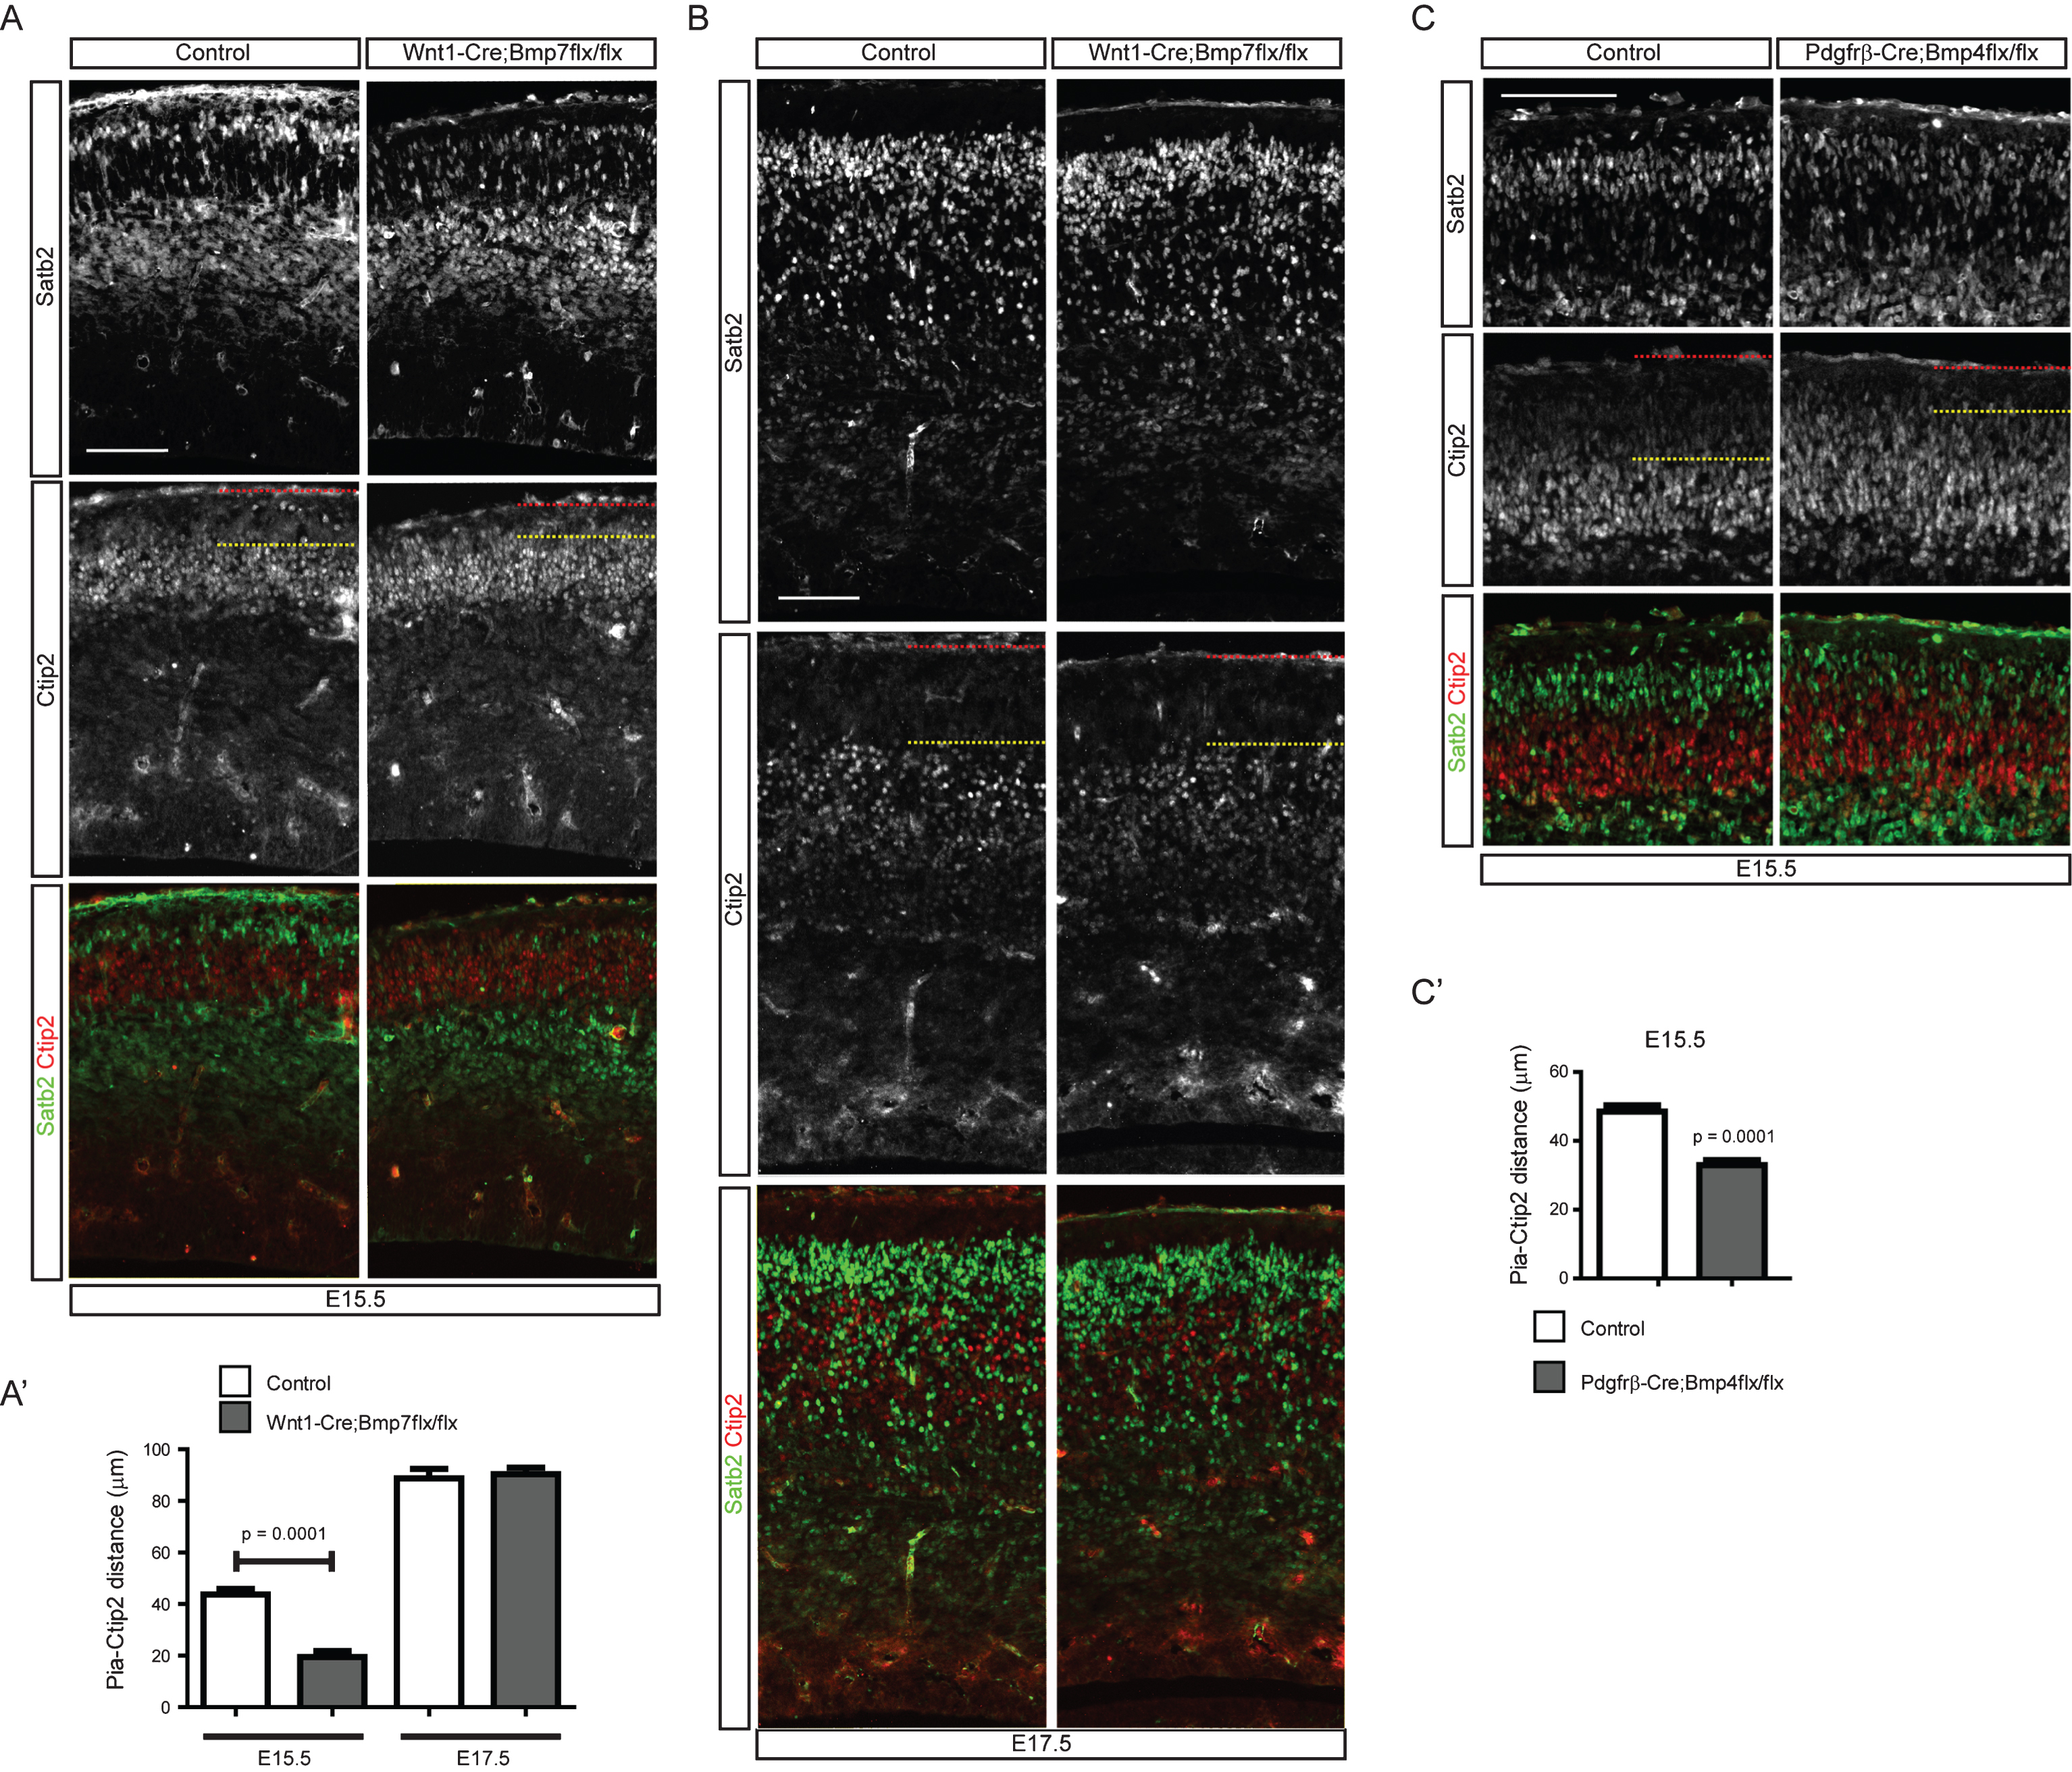 Distribution of cortical neurons in the meninges-specific Bmp mutants. A) E15.5 embryonic brains of Wnt1-Cre;Bmp7flx/flx mutants and their control littermates were stained for Ctip2 or Satb2. A’) The distance of the pia and the Ctip2+ neurons were plotted (n = 3). B) E17.5 embryonic brains of Wnt1-Cre;Bmp7flx/flx mutants and their control littermates were stained for Ctip2 or Satb2 (n = 3). C) E15.5 embryonic brains of Pdgfrβ-Cre;Bmp4flx/flx mutants and their control littermates were stained for Satb2 or Ctip2. C’) The distances between the pia and the Ctip2+ neurons were plotted (n = 3). The red and yellow dotted lines represent the pia and the Ctip2+ neurons closest to the pia, respectively. Student’s t-test was conducted to determine the statistical significance of the difference between the control and mutant embryos. Scale bars = 100 μm.